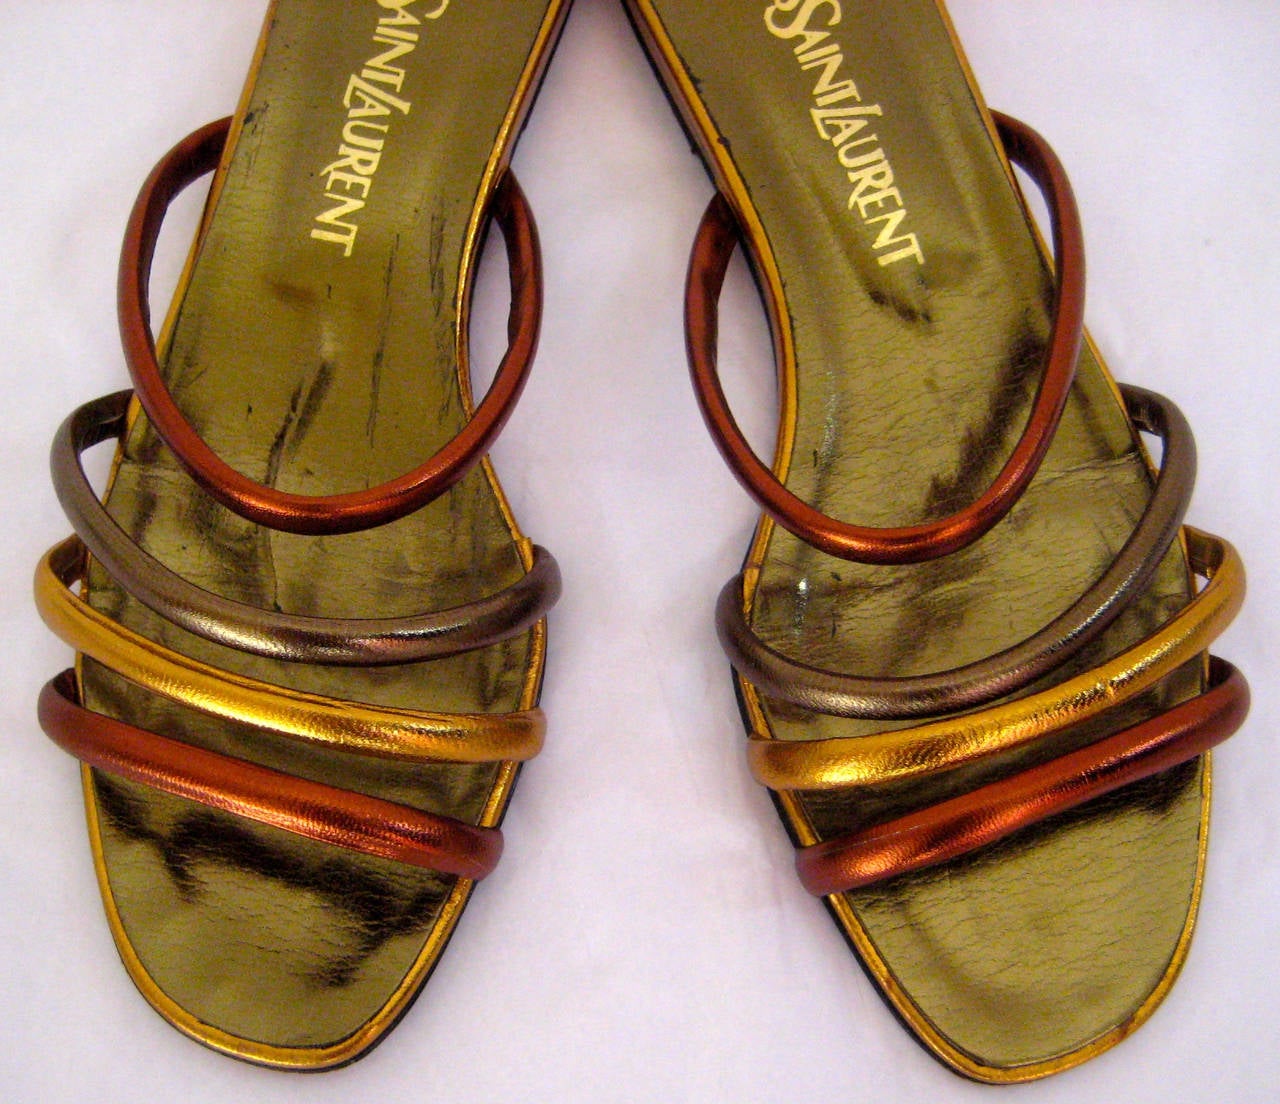 Yves Saint Laurent Metallic Leather Sandals In Good Condition For Sale In Chicago, IL